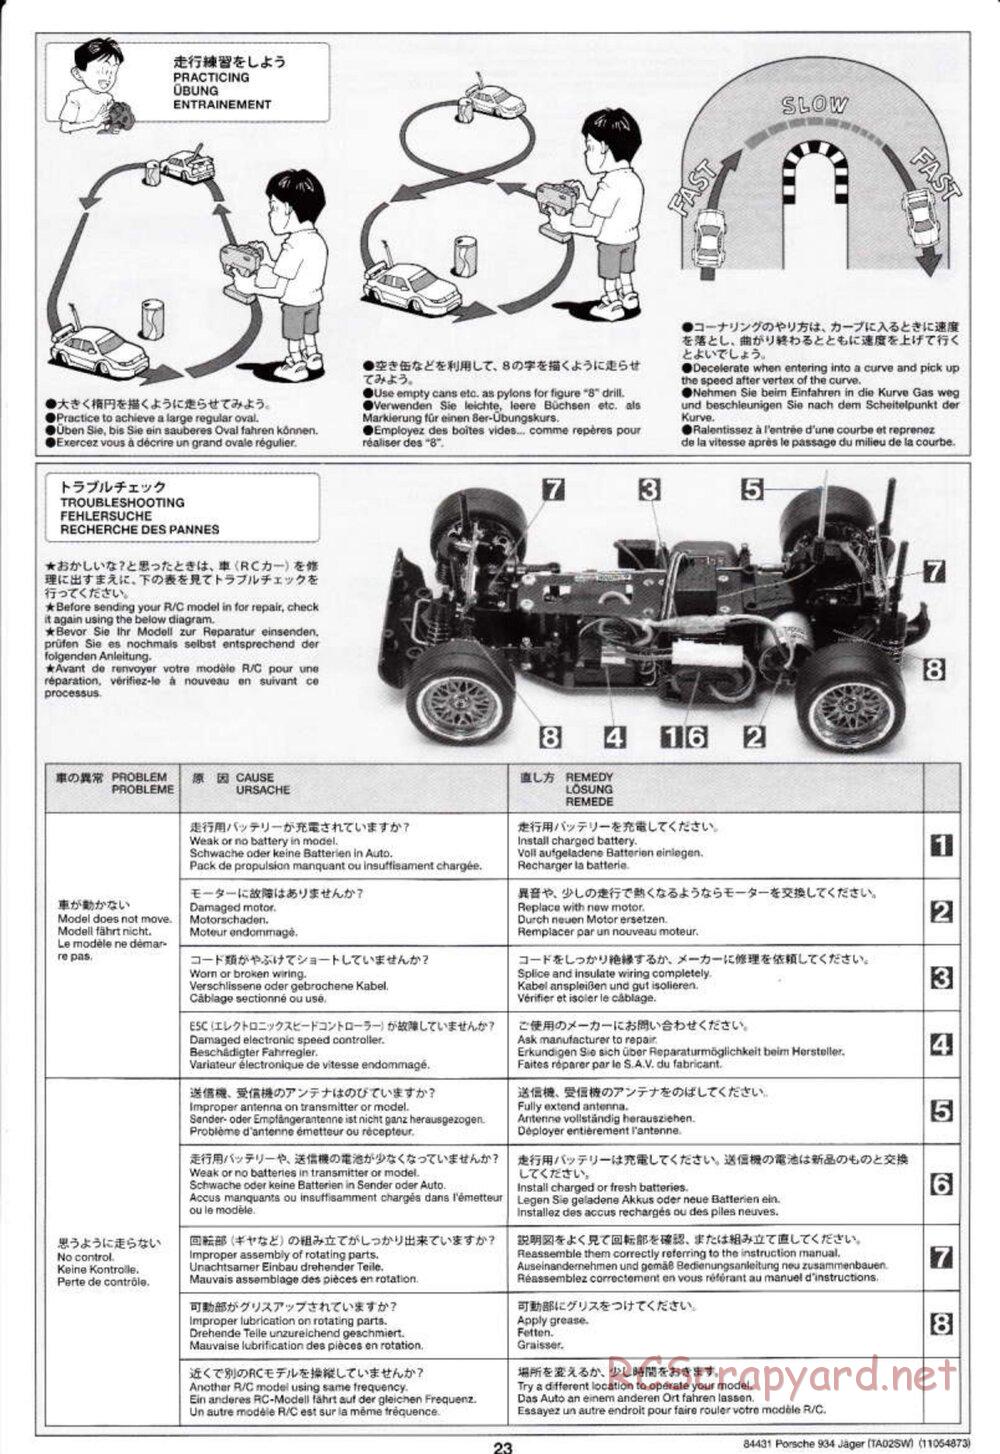 Tamiya - Porsche Turbo RSR Type 934 Jagermeister - TA-02SW Chassis - Manual - Page 23